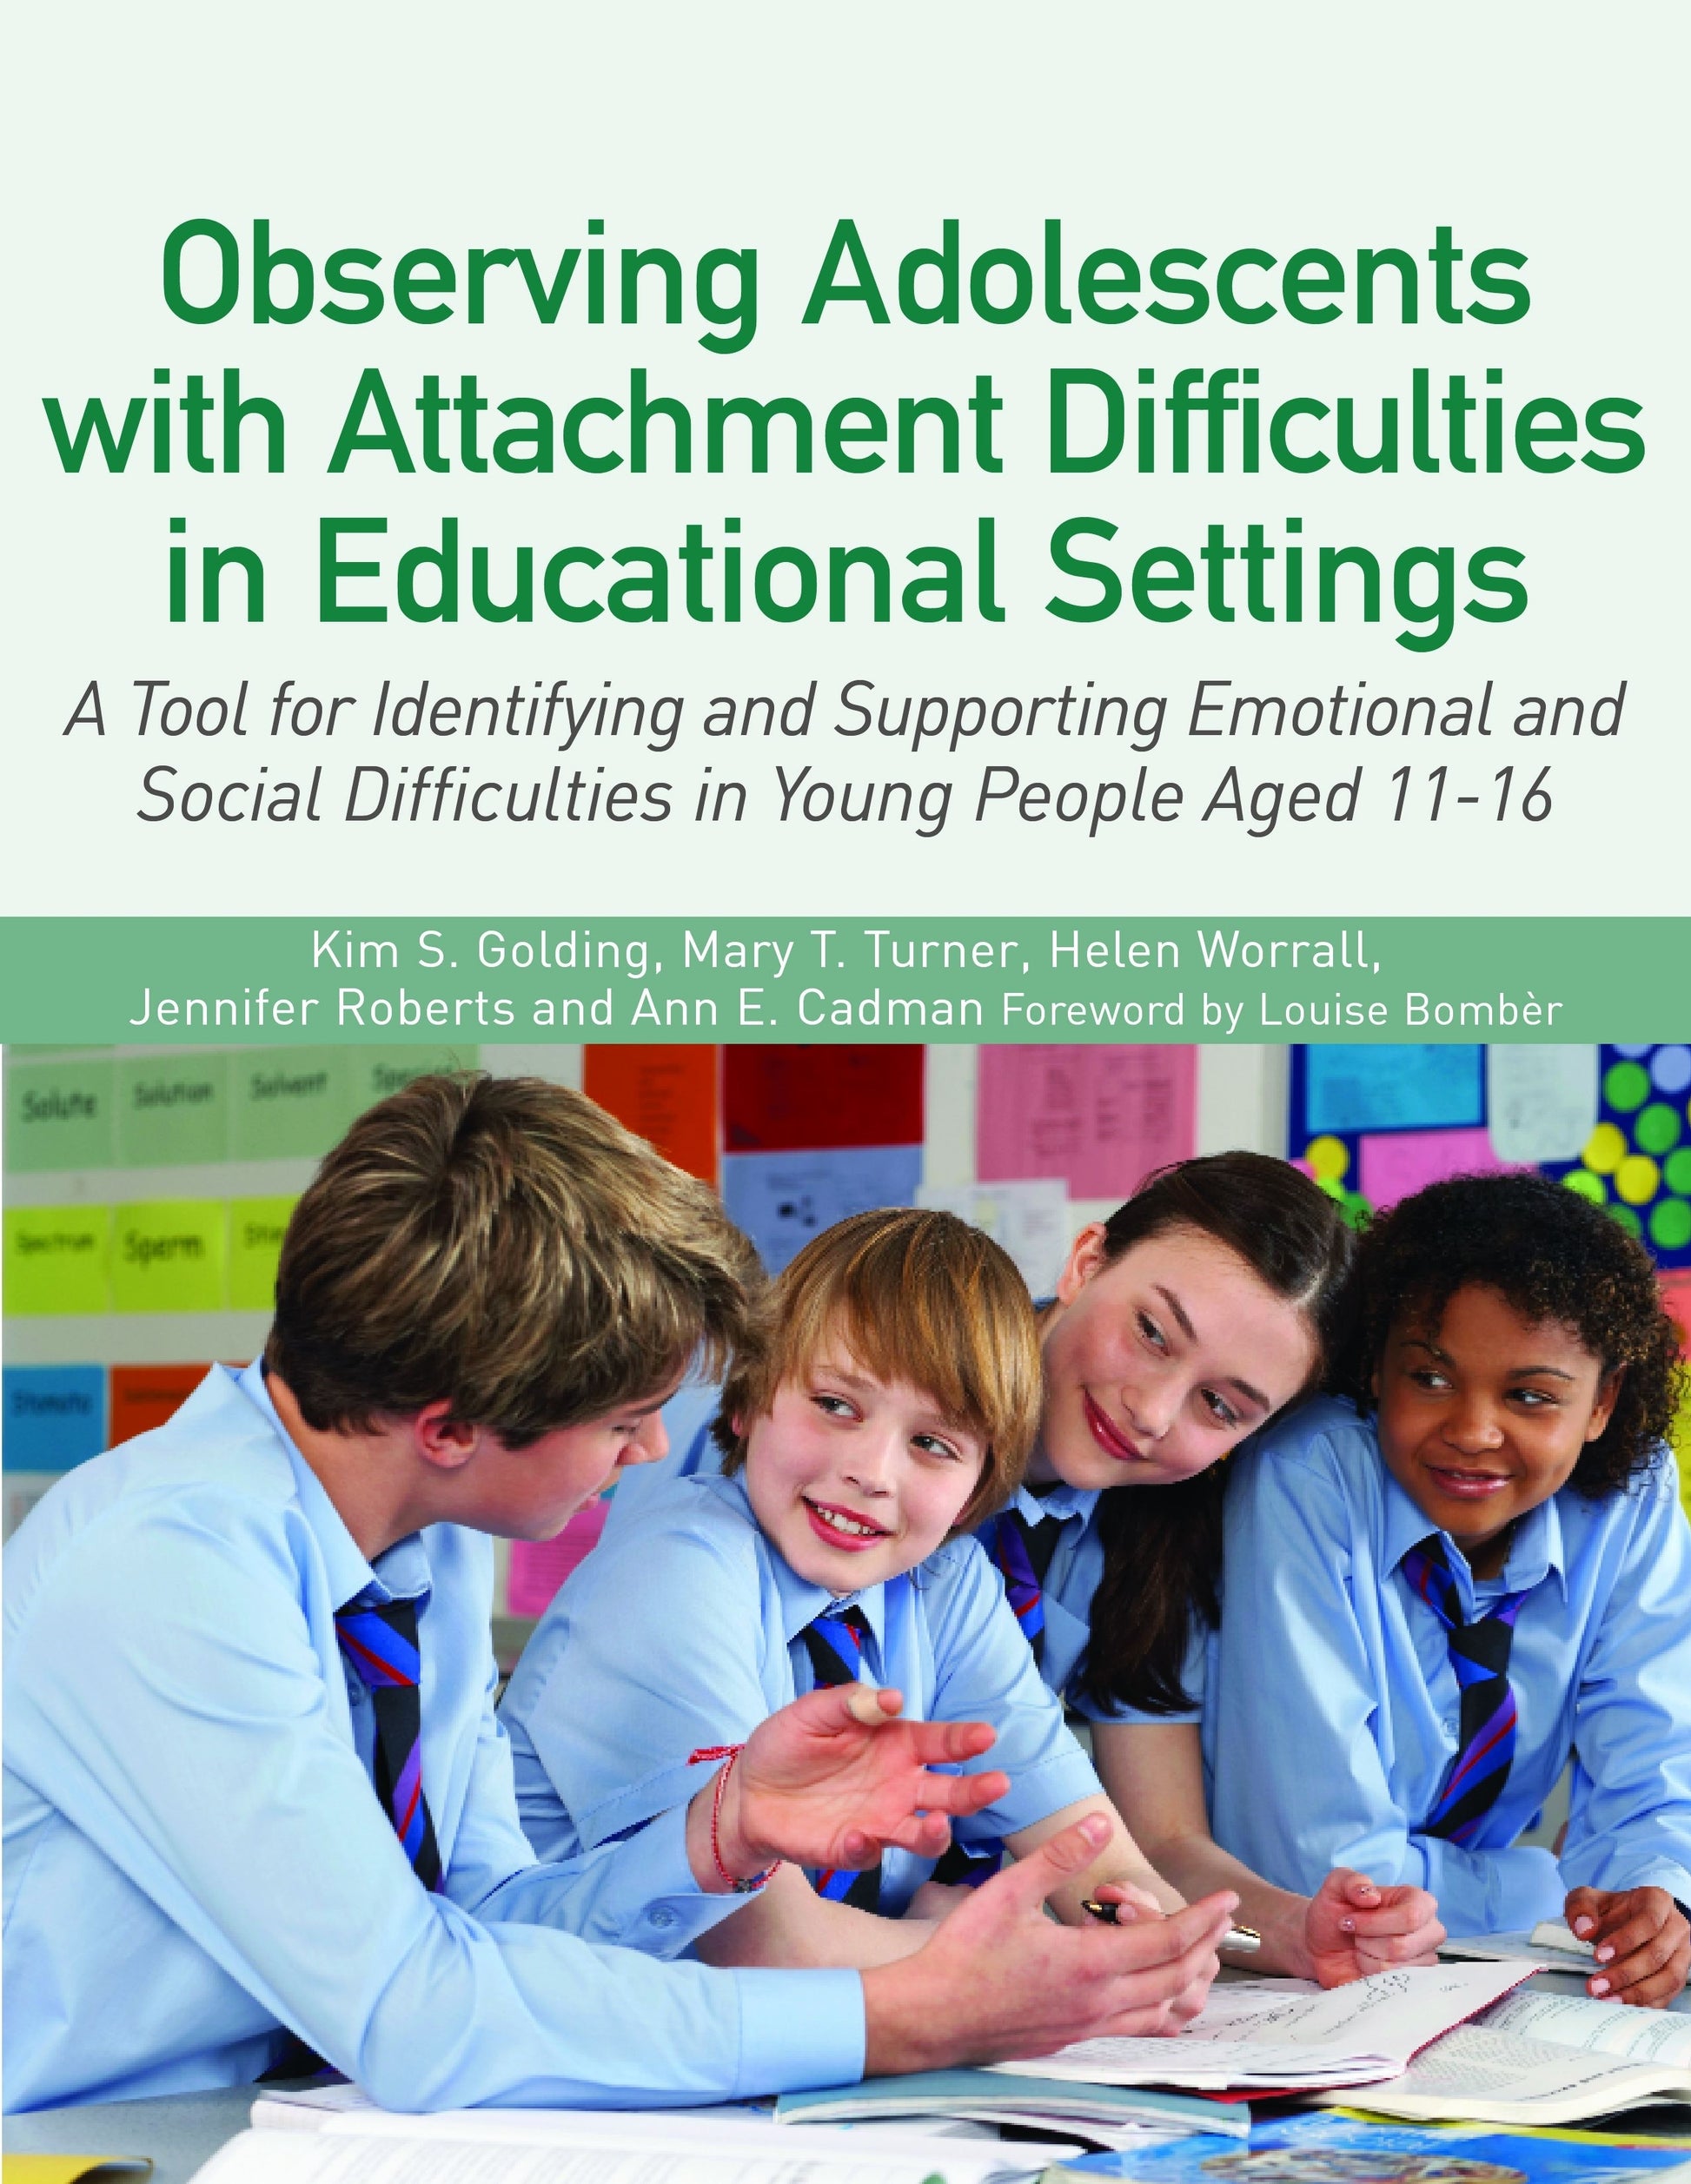 Observing Adolescents with Attachment Difficulties in Educational Settings by Louise Michelle Bombèr, Kim S. Golding, Helen Worrall, Mary Turner, Ann Cadman, Jennifer Roberts